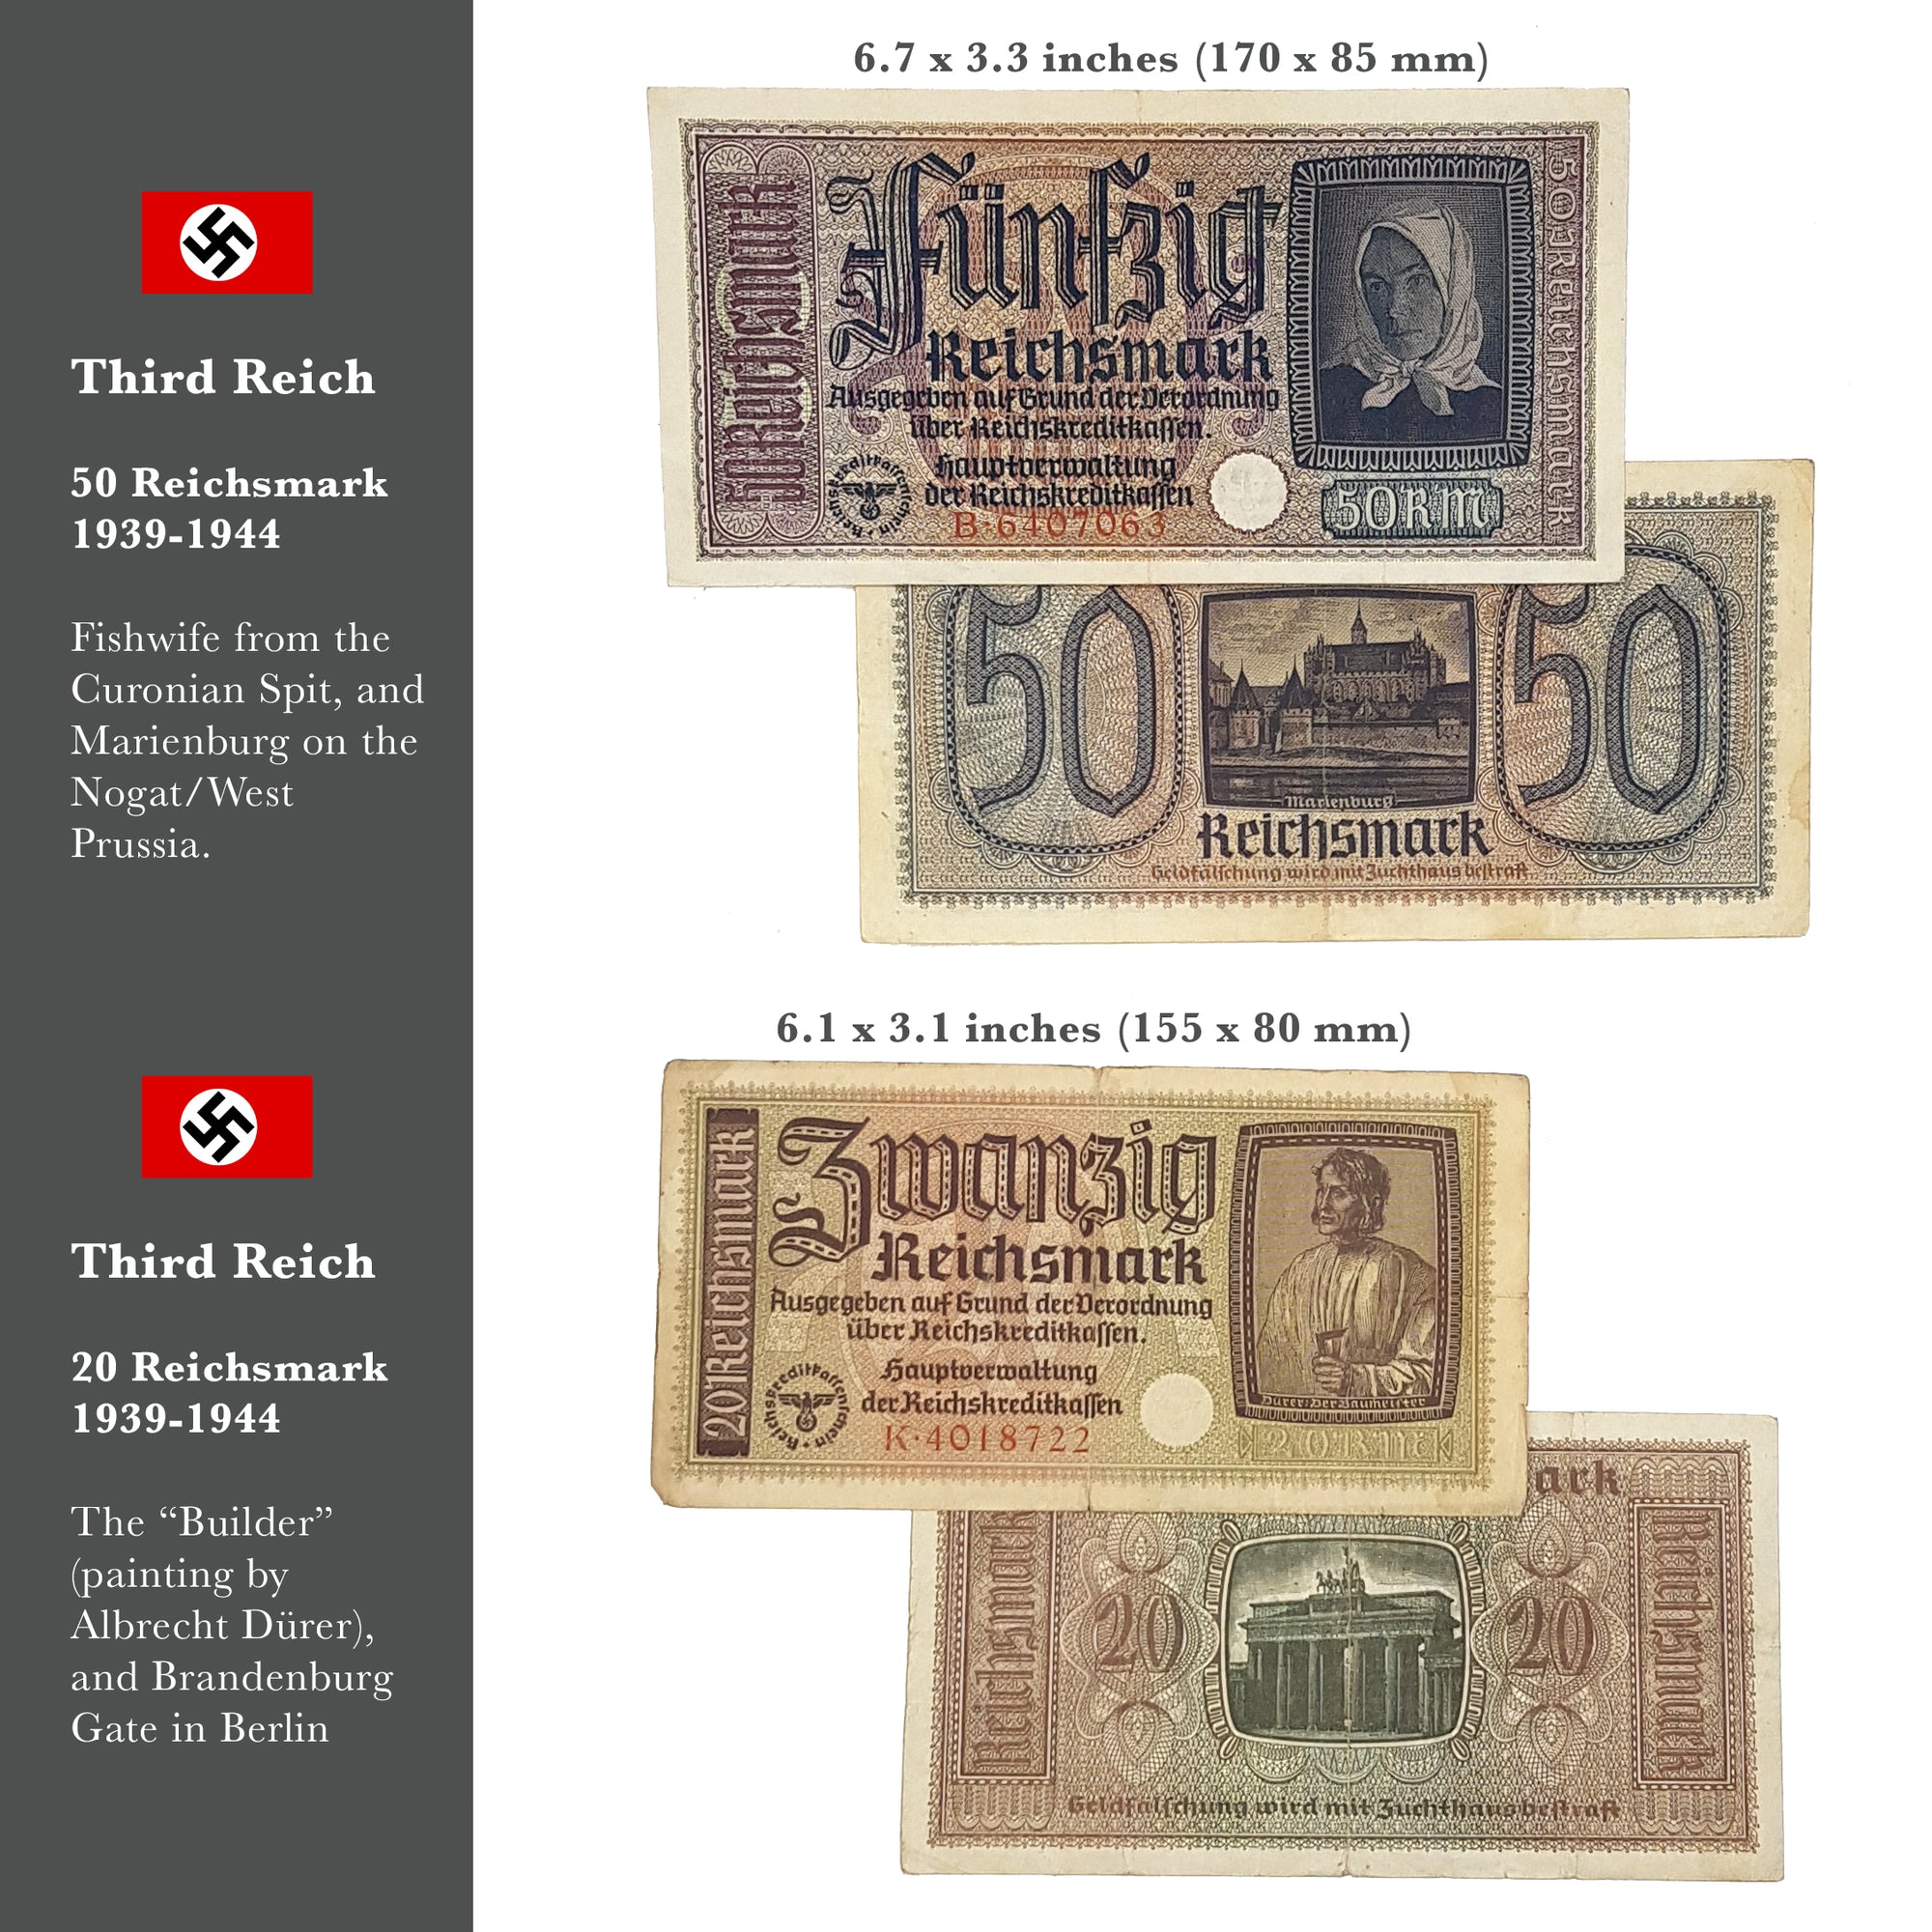 WW2 Memorabilia - World Currency - 2 Banknotes That were Used During The World War 2 by German Troops (1939-42) - Third Reich Money, Certificate of Authenticity Included.